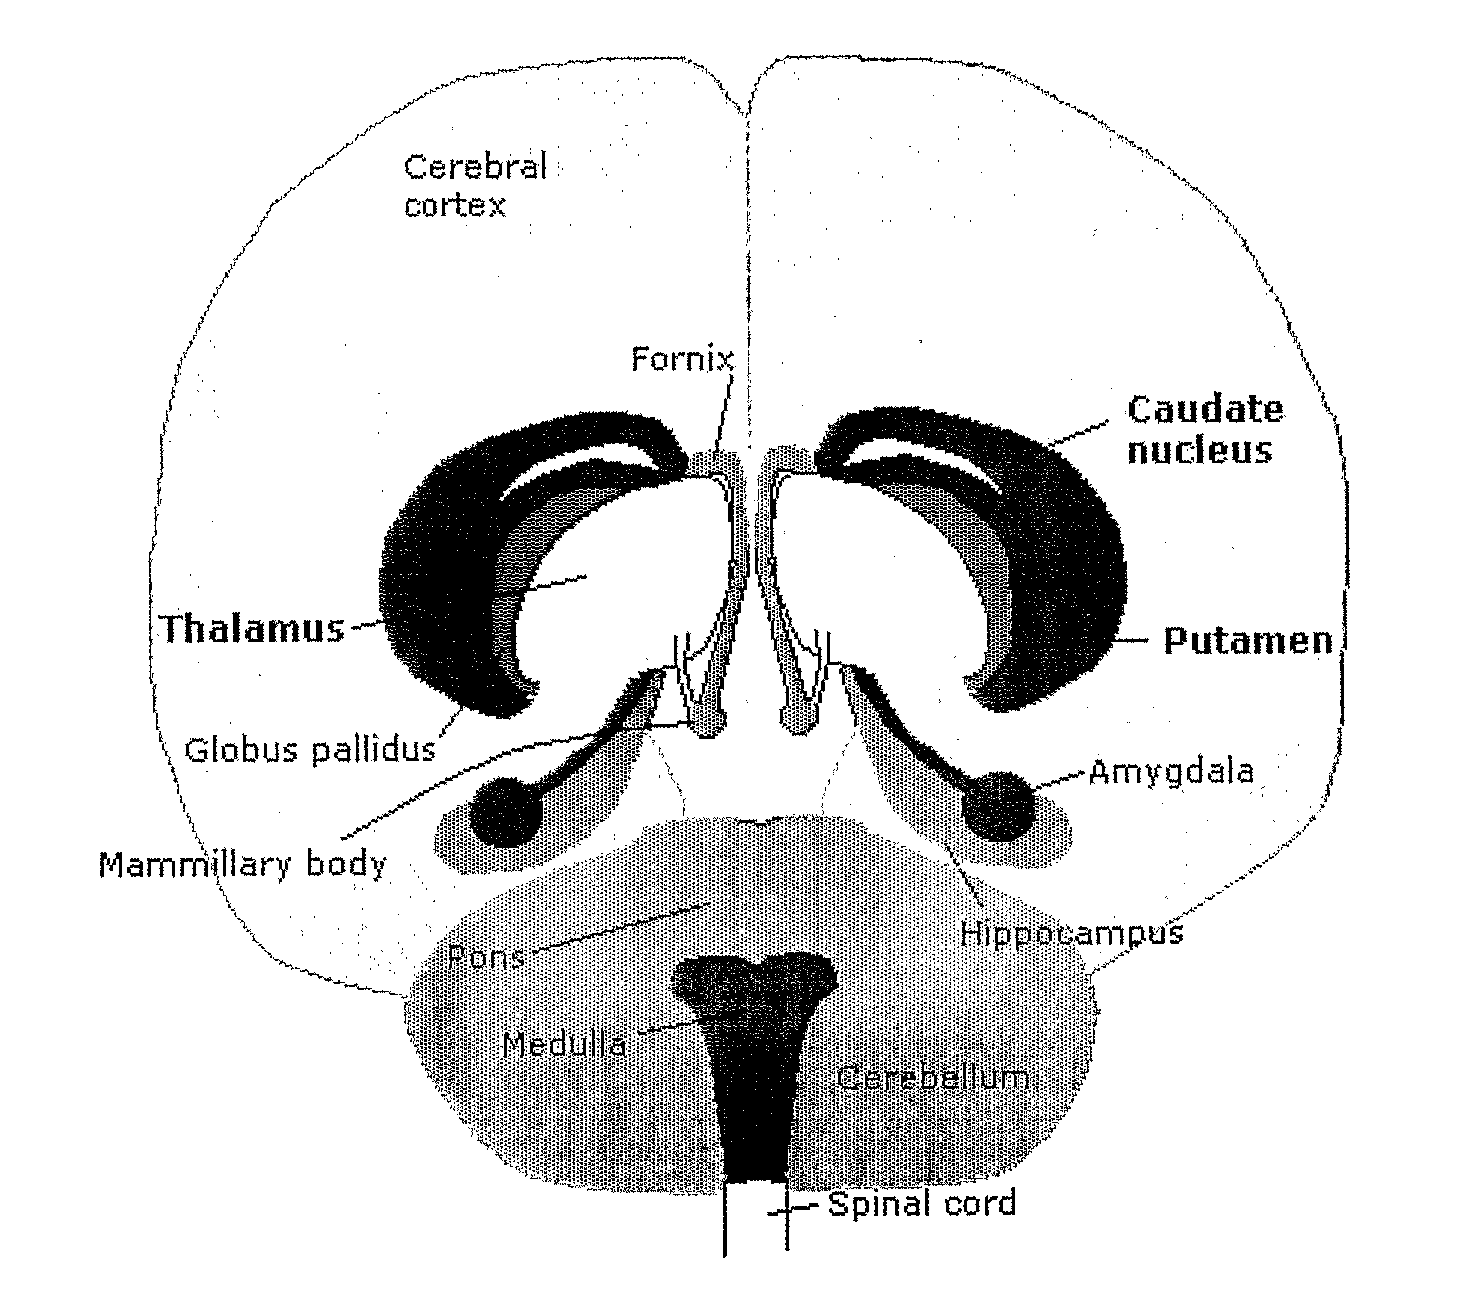 System and method for volumetric analysis of medical images